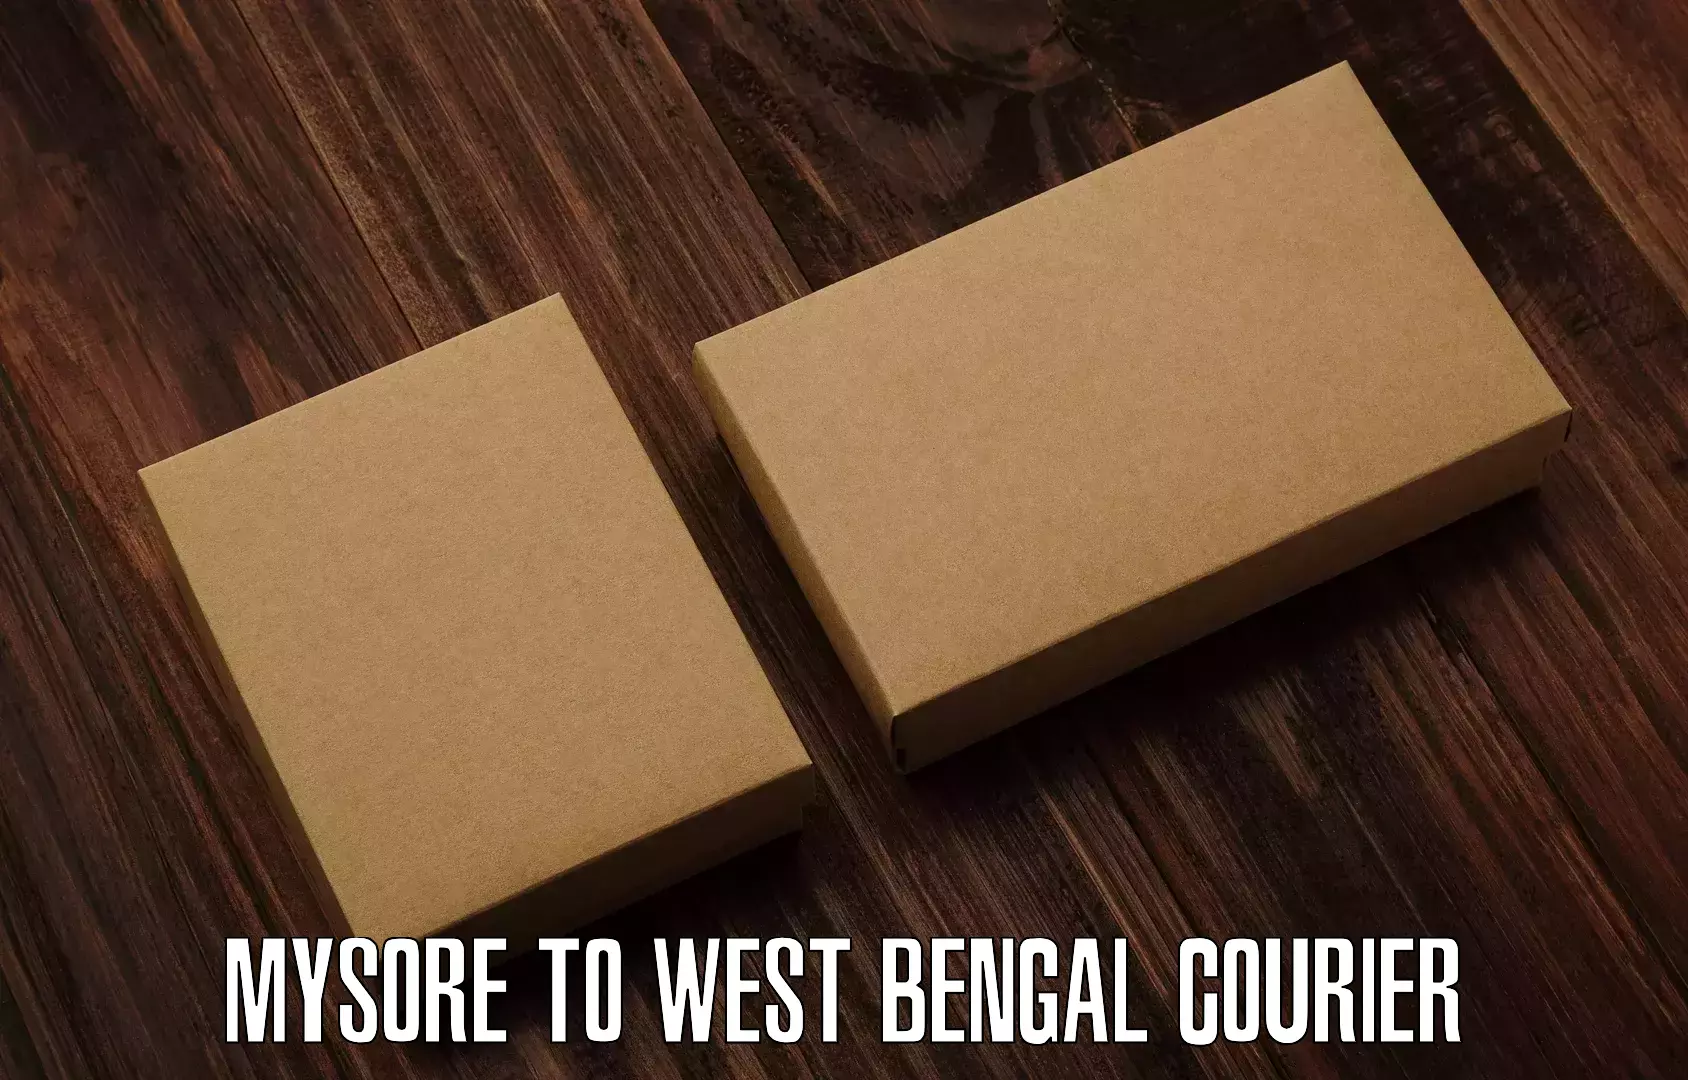 Business delivery service Mysore to West Bengal